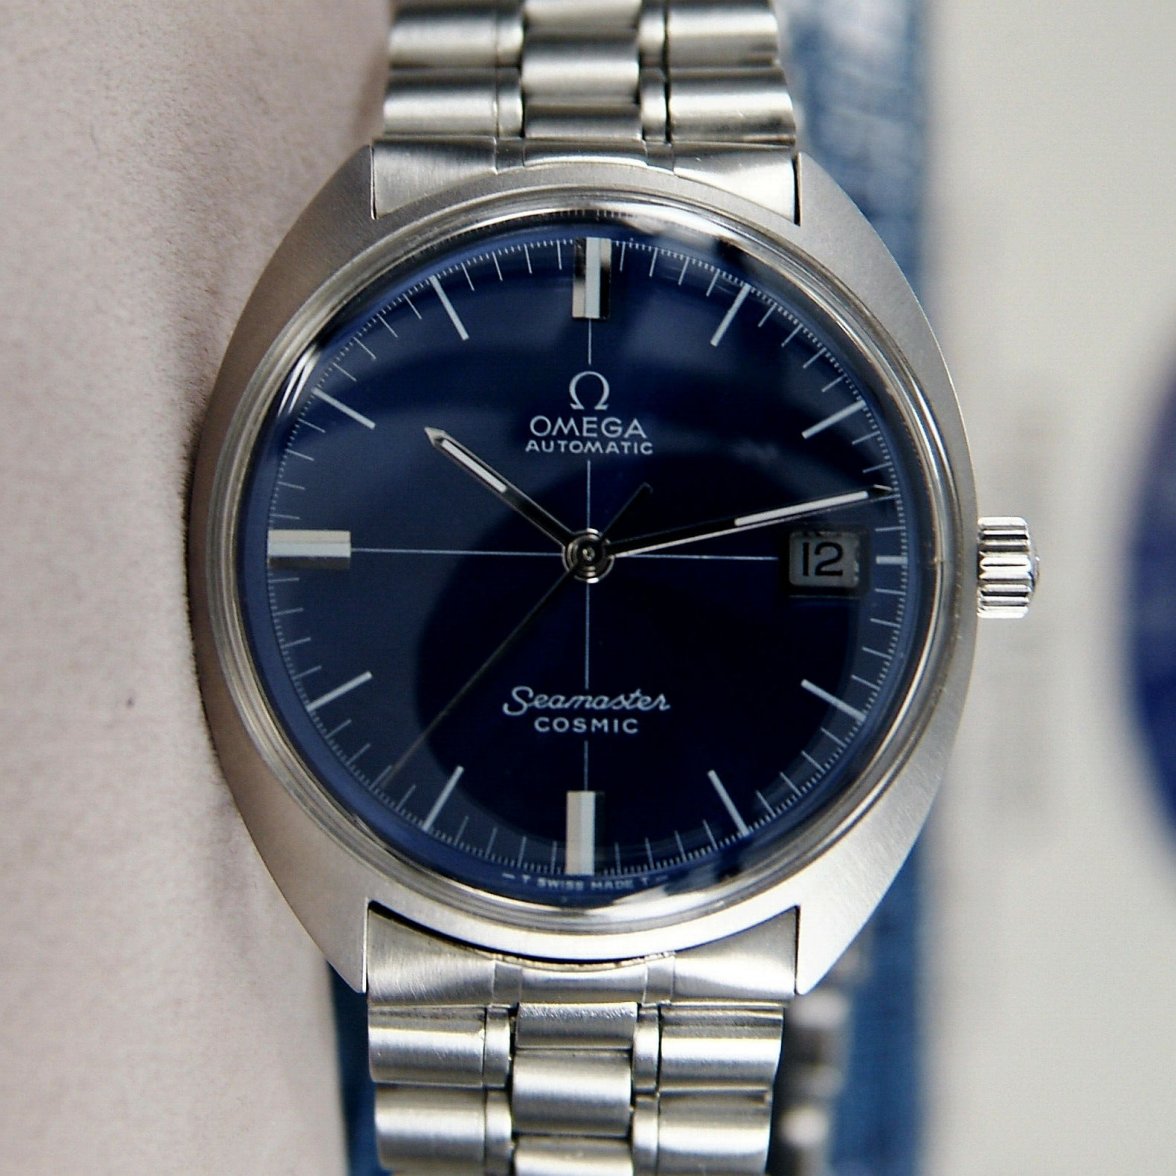 Omega Seamaster Cosmic redial Cal. 565 | Omega Forums